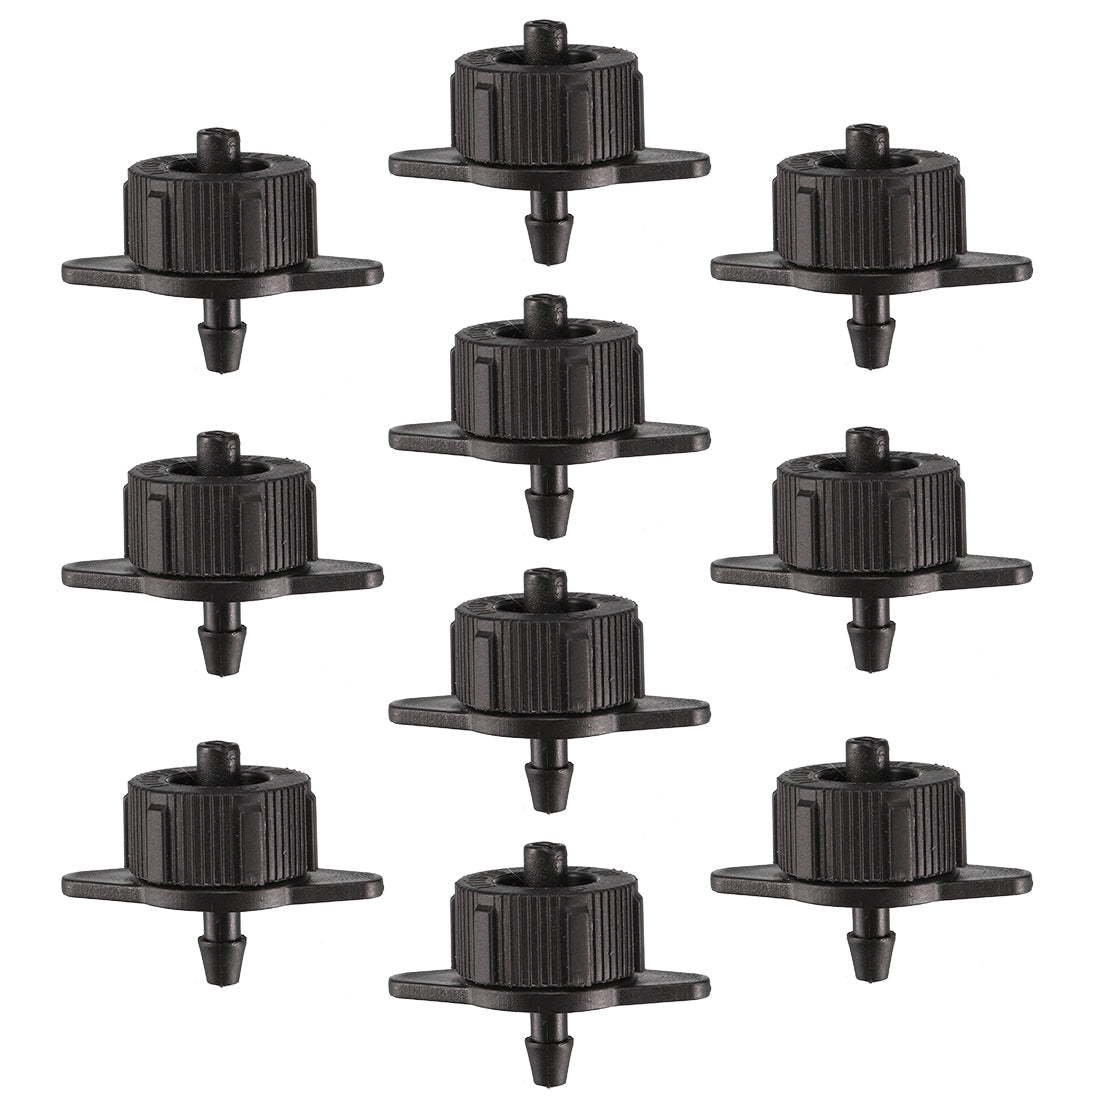 uxcell Uxcell Pressure Compensating Dripper 1 GPH 4L/H Emitter for Garden Lawn Drip Irrigation with Barbed Hose Connector, Plastic Black 50pcs